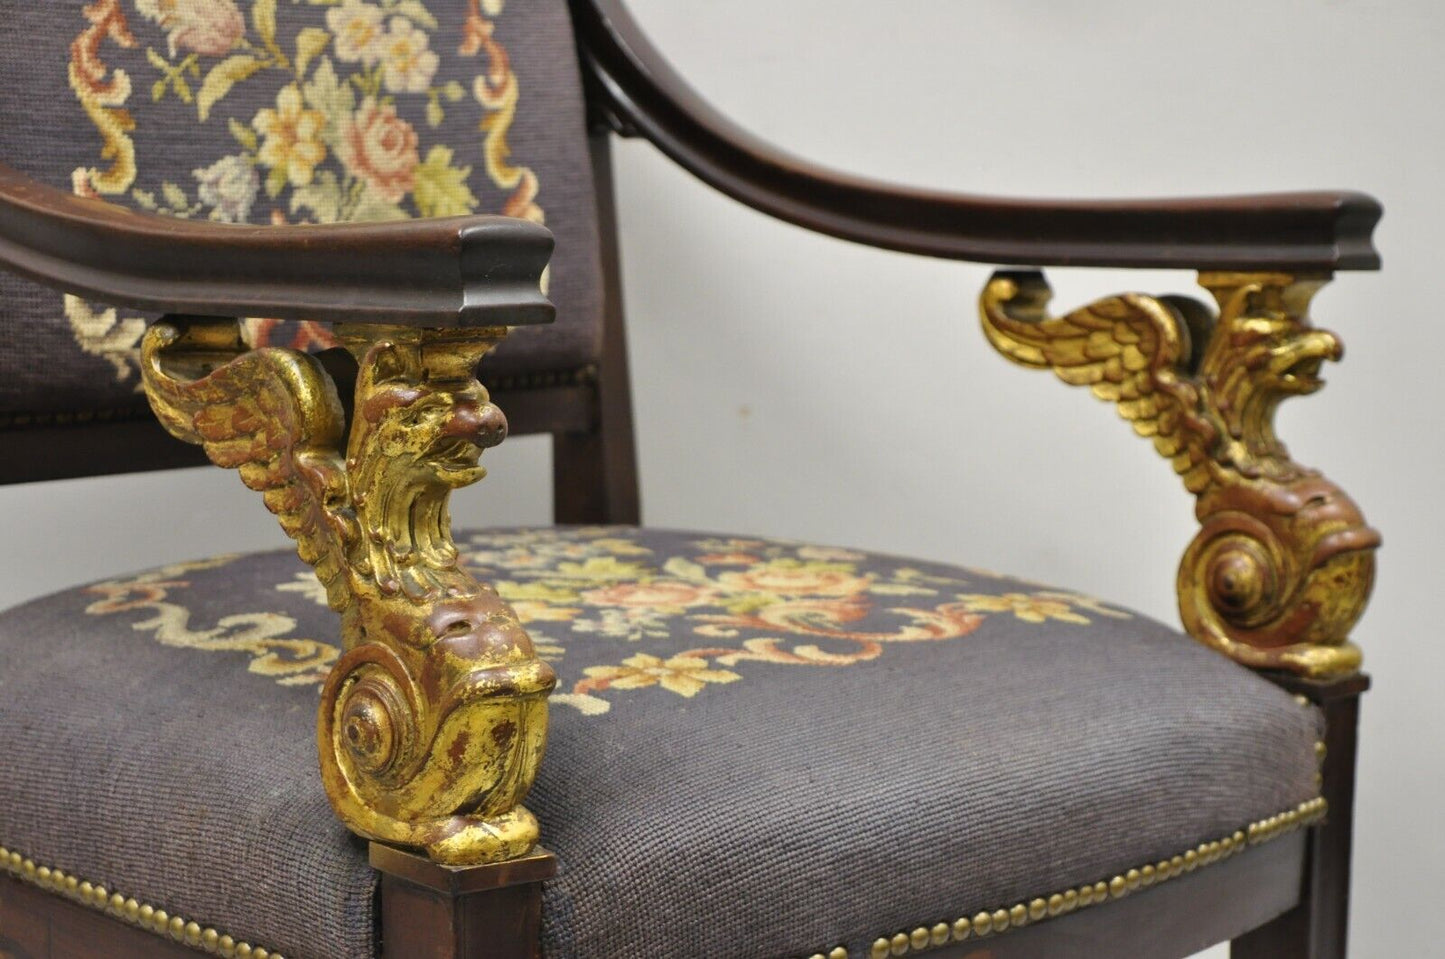 Antique French Empire Giltwood Winged Griffin Needlepoint Inlay Parlor Arm Chair